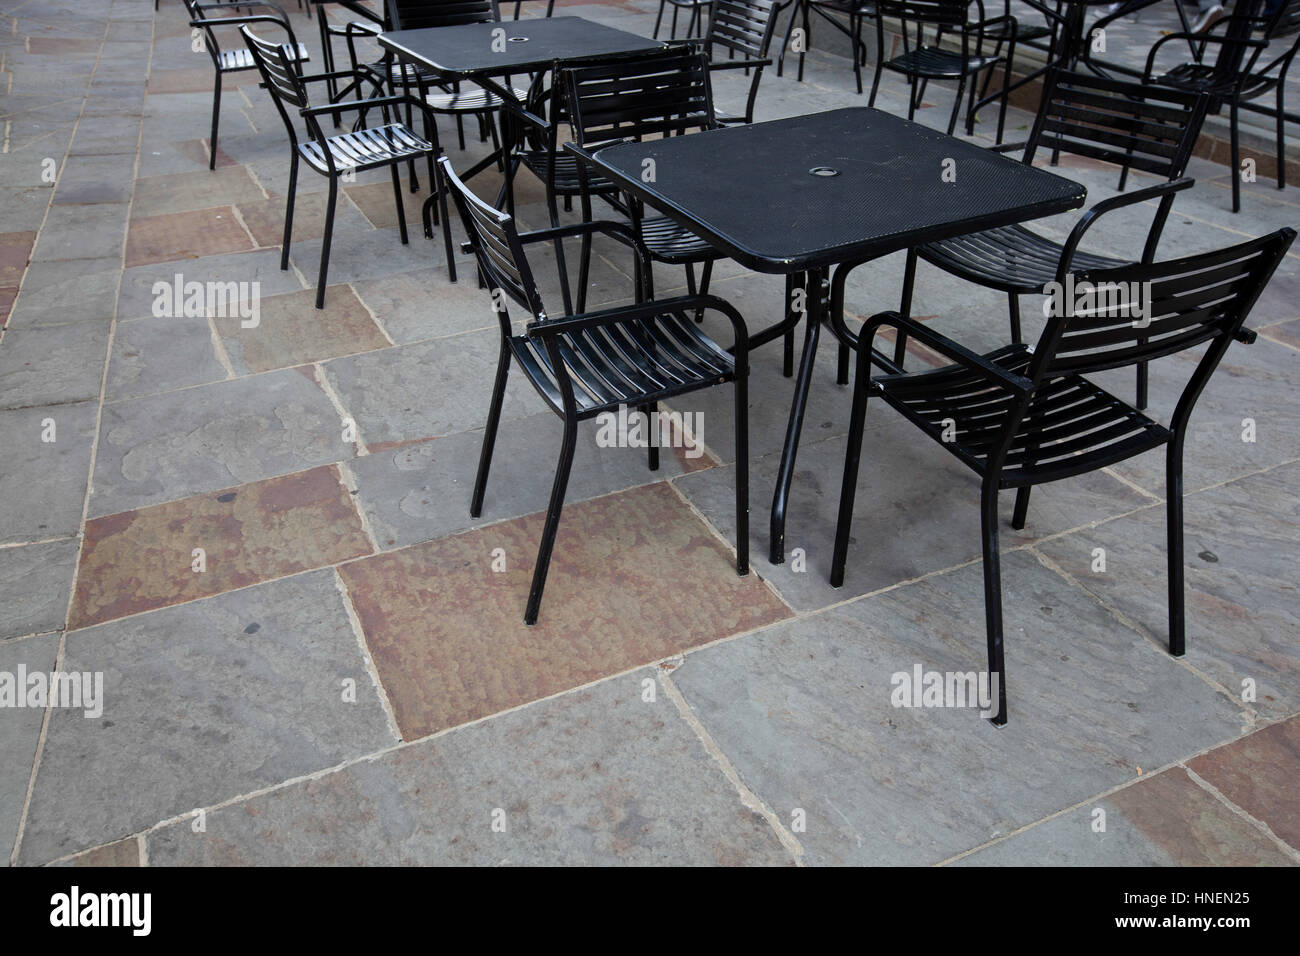 Tables and chairs at outdoor cafe Stock Photo